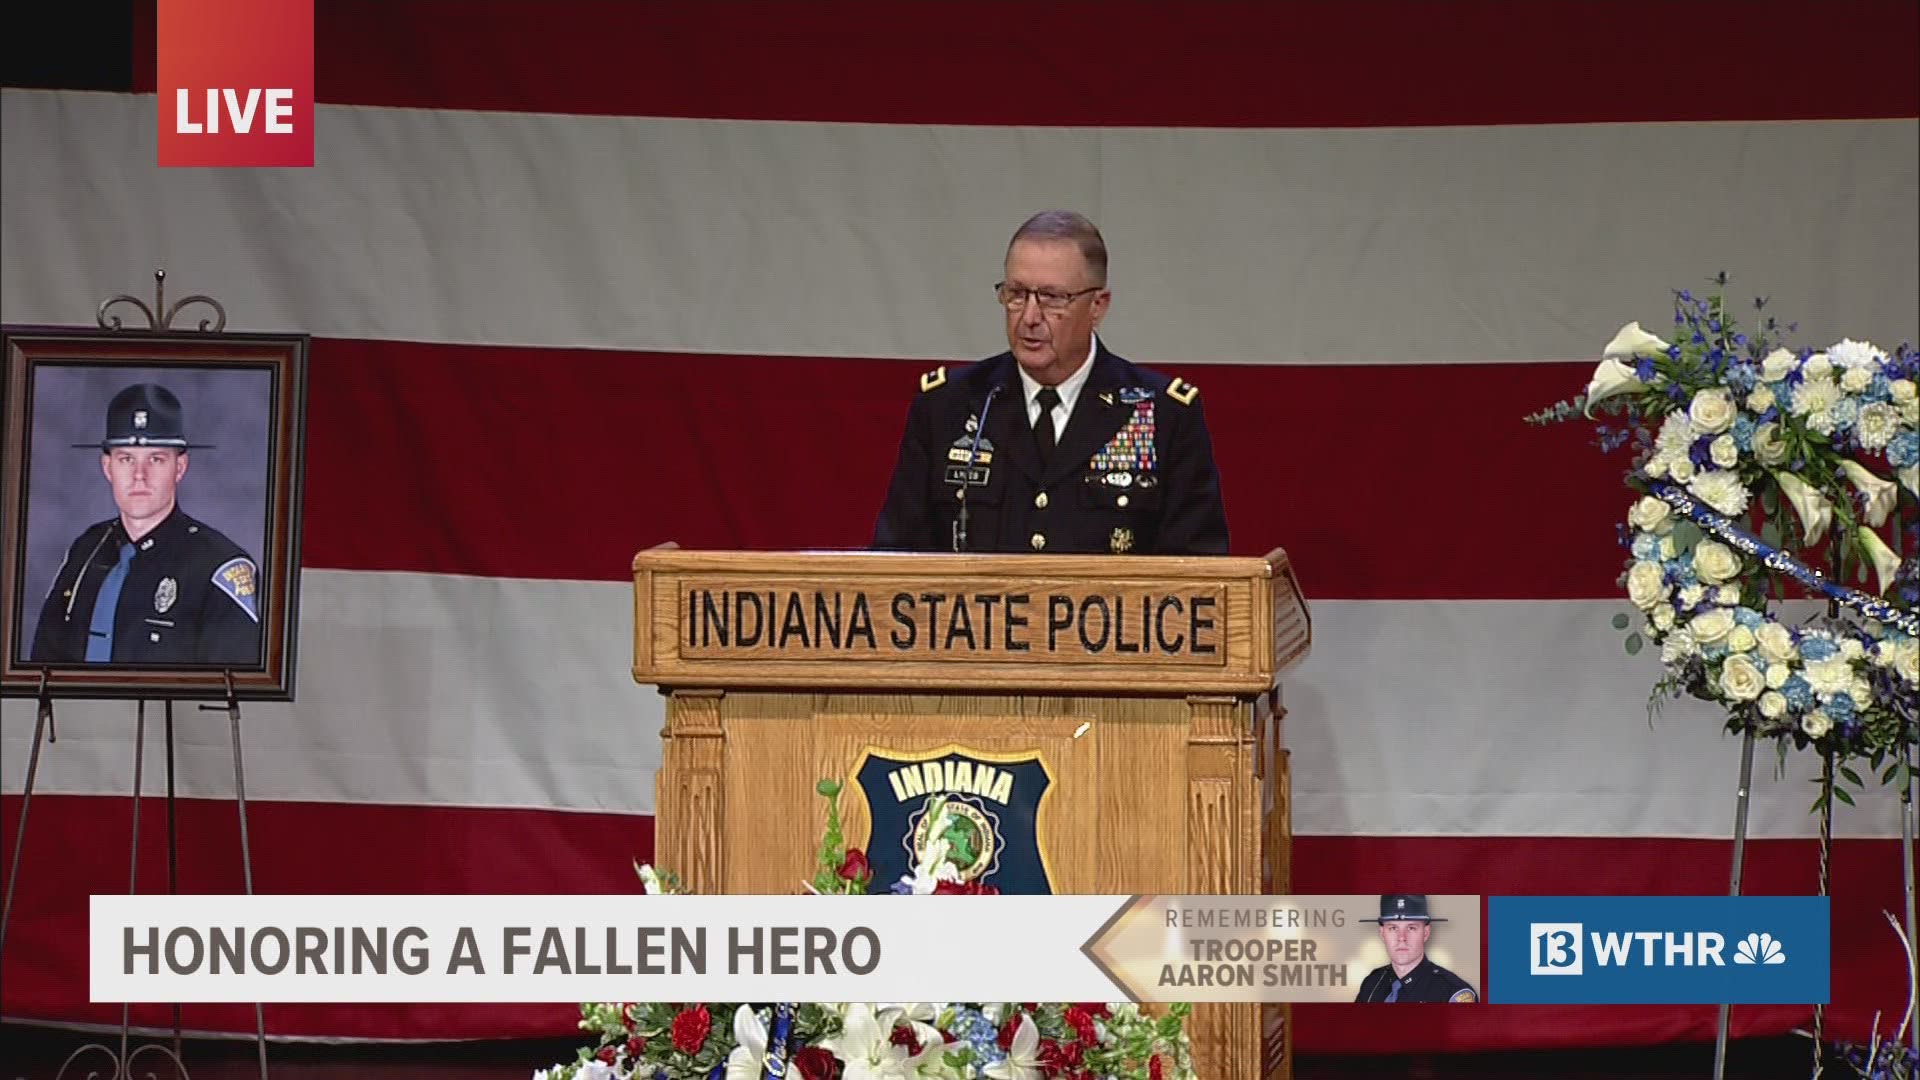 "We must take comfort and reassurance in knowing that his loss occurred for the greater good of humanity," said Indiana National Guard Major General R. Dale Lyles.